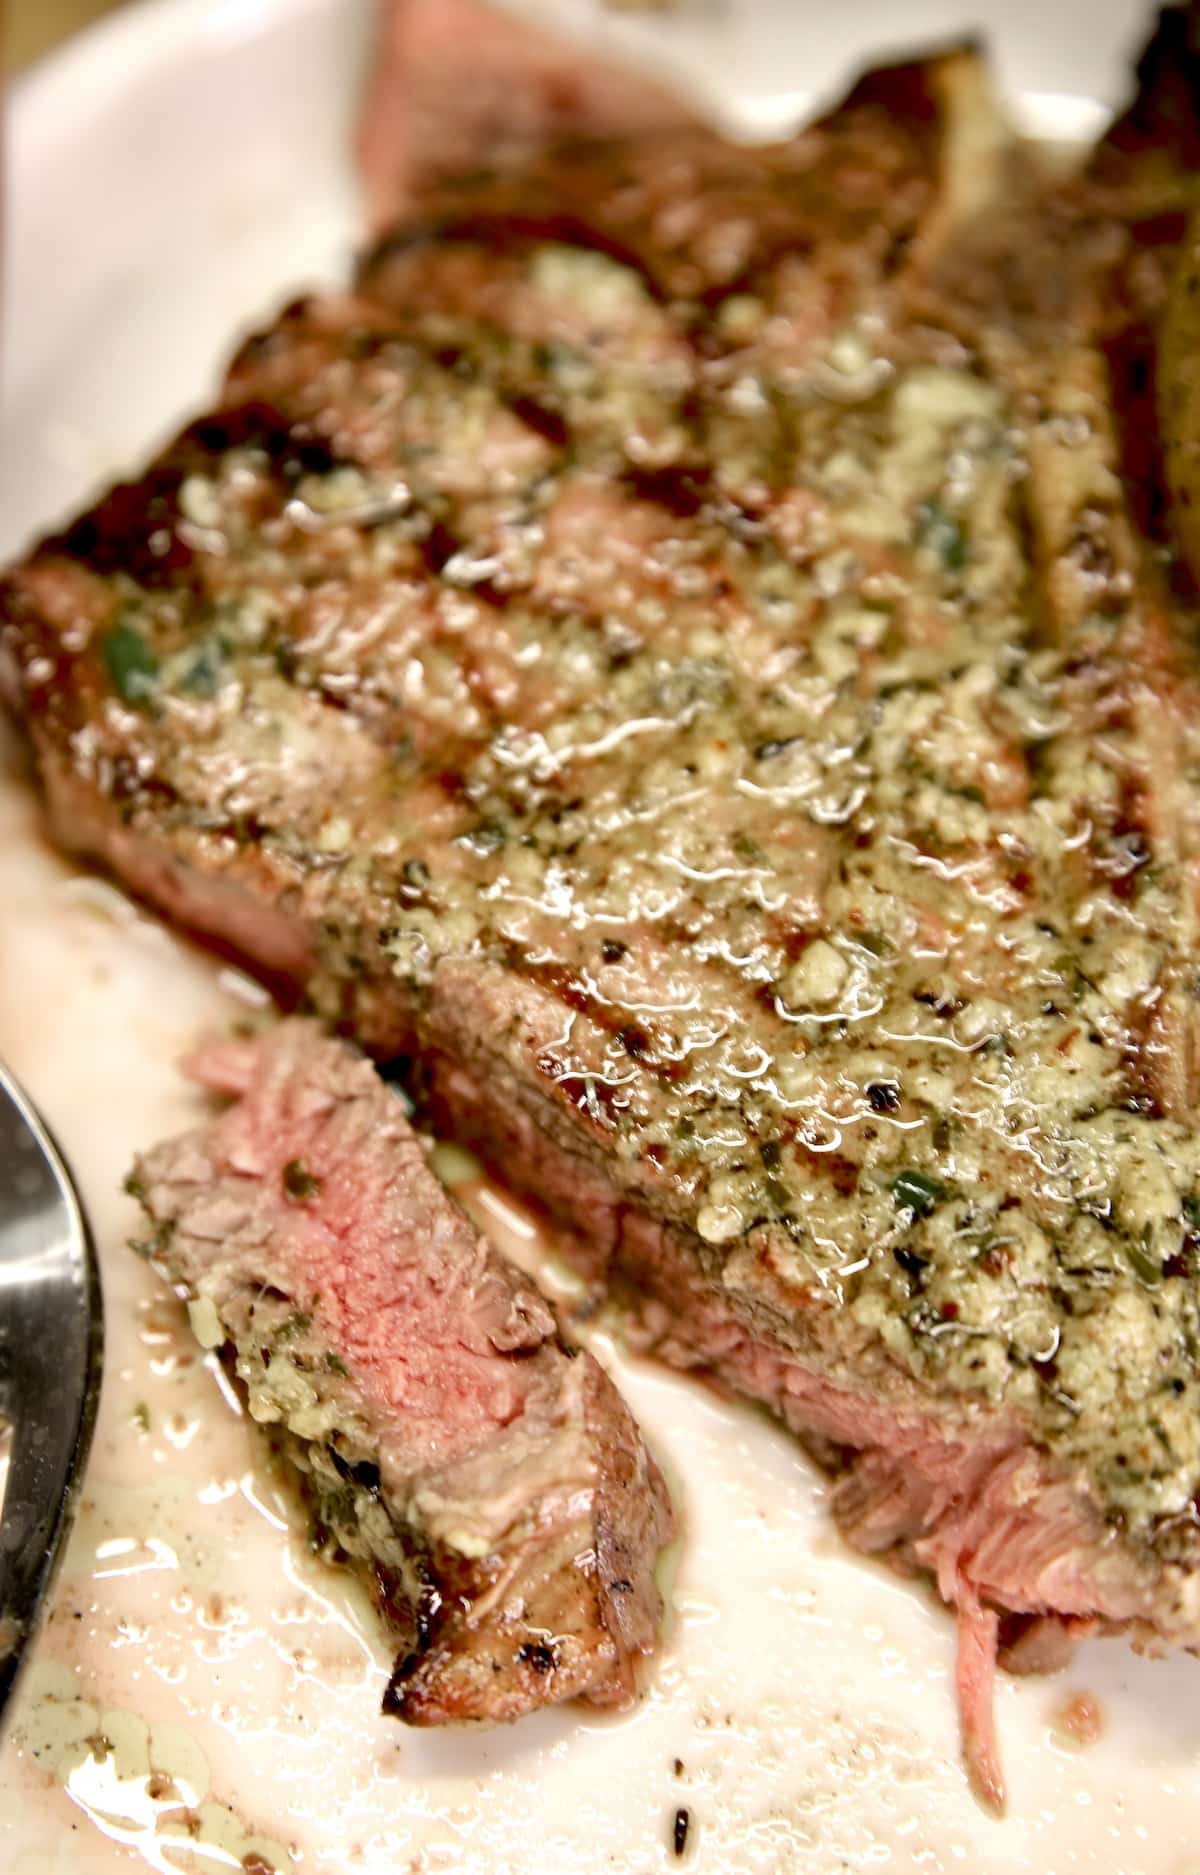 T-Bone steak with herb butter, slice on a plate.